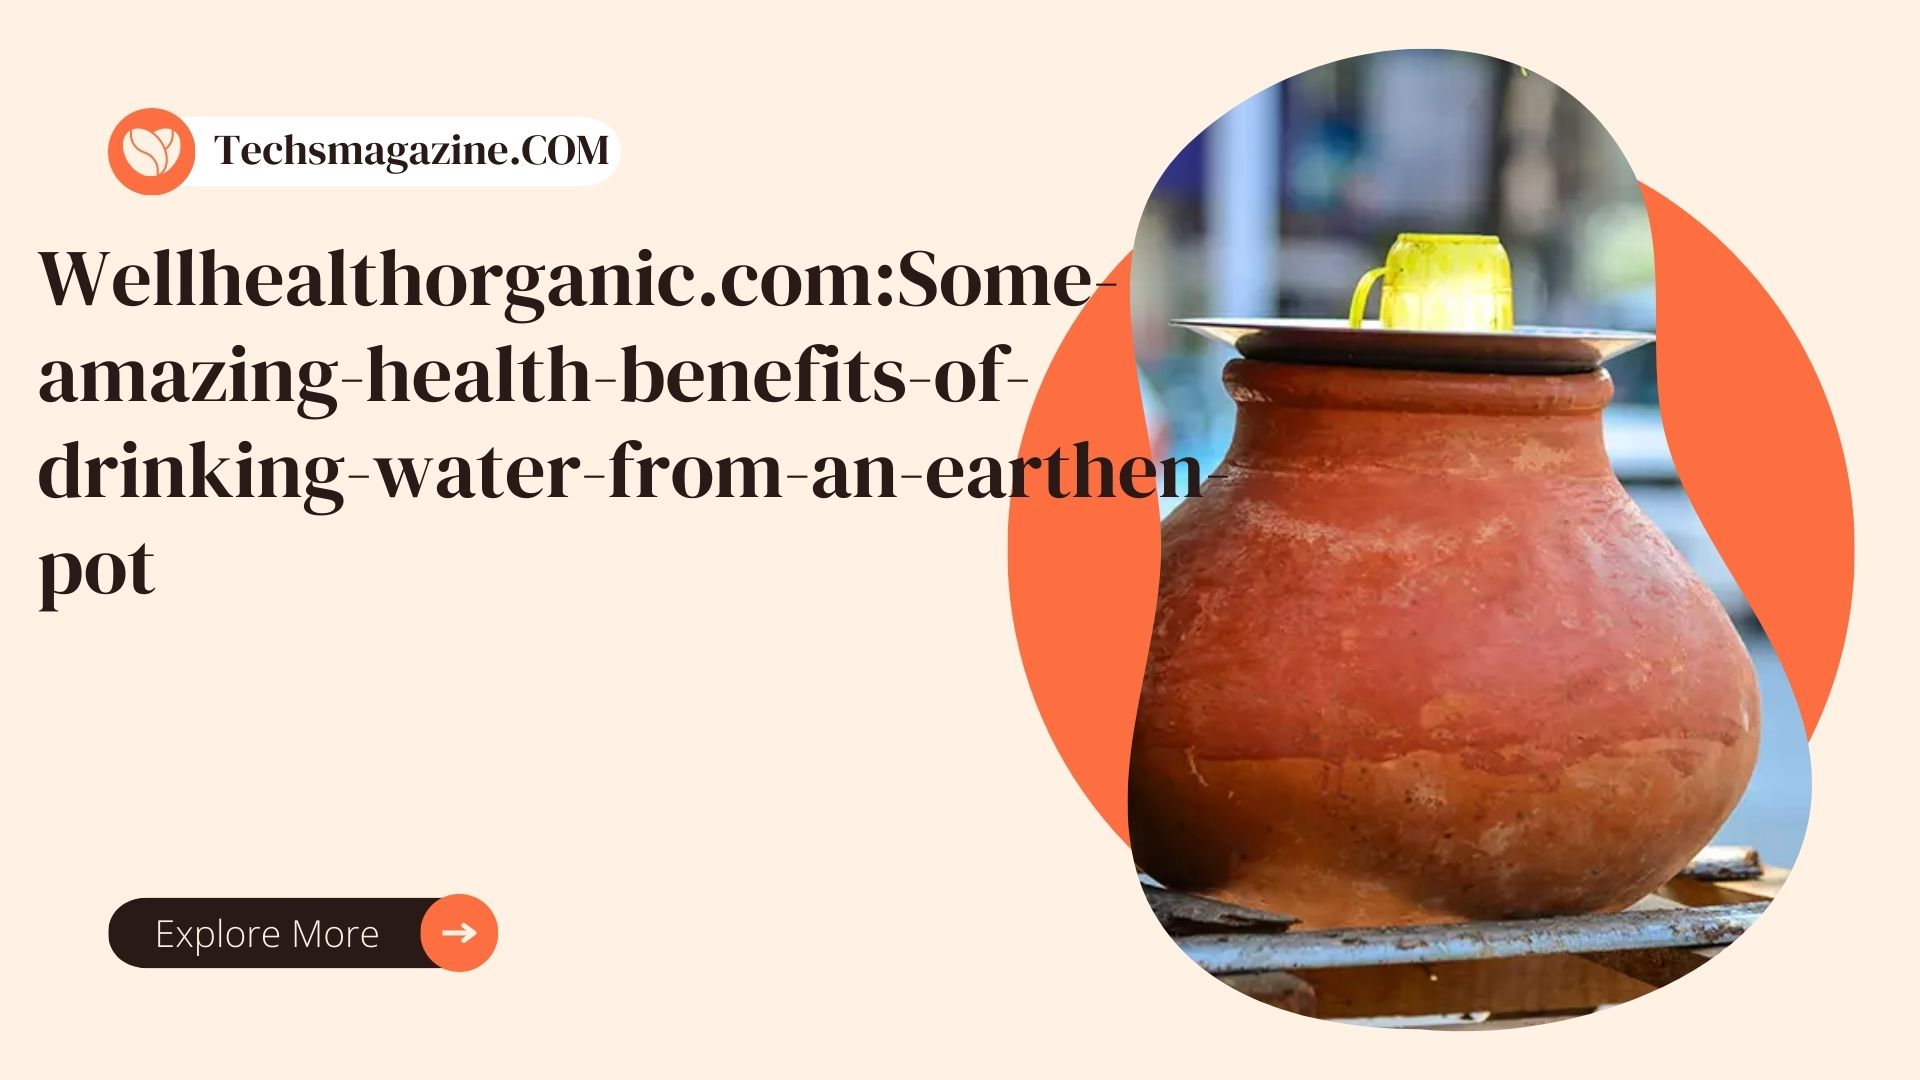 Wellhealthorganic.comSome-amazing-health-benefits-of-drinking-water-from-an-earthen-pot